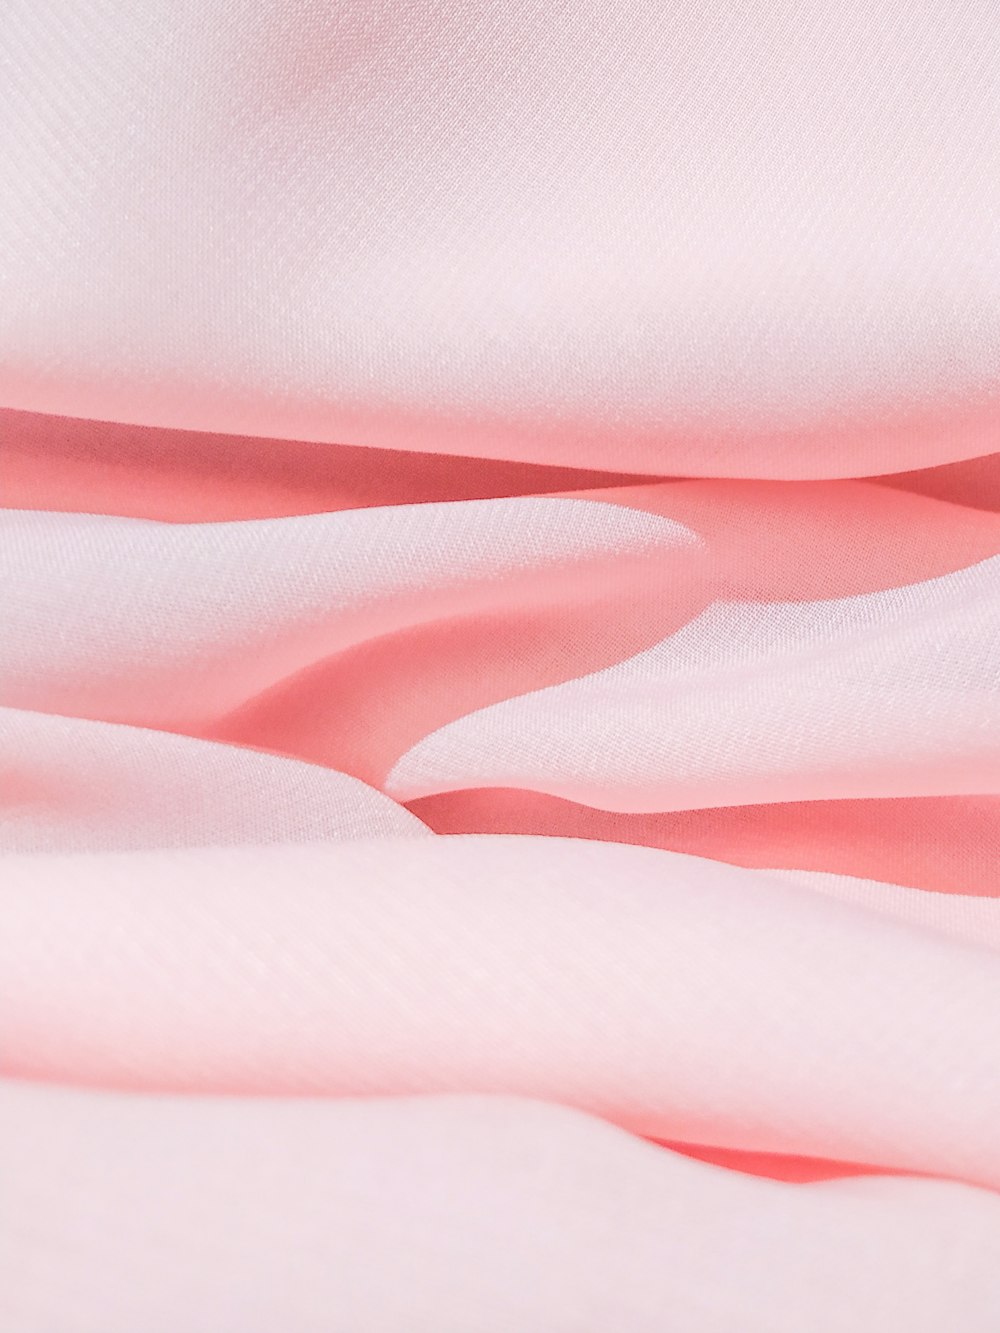 pink and white stripe textile